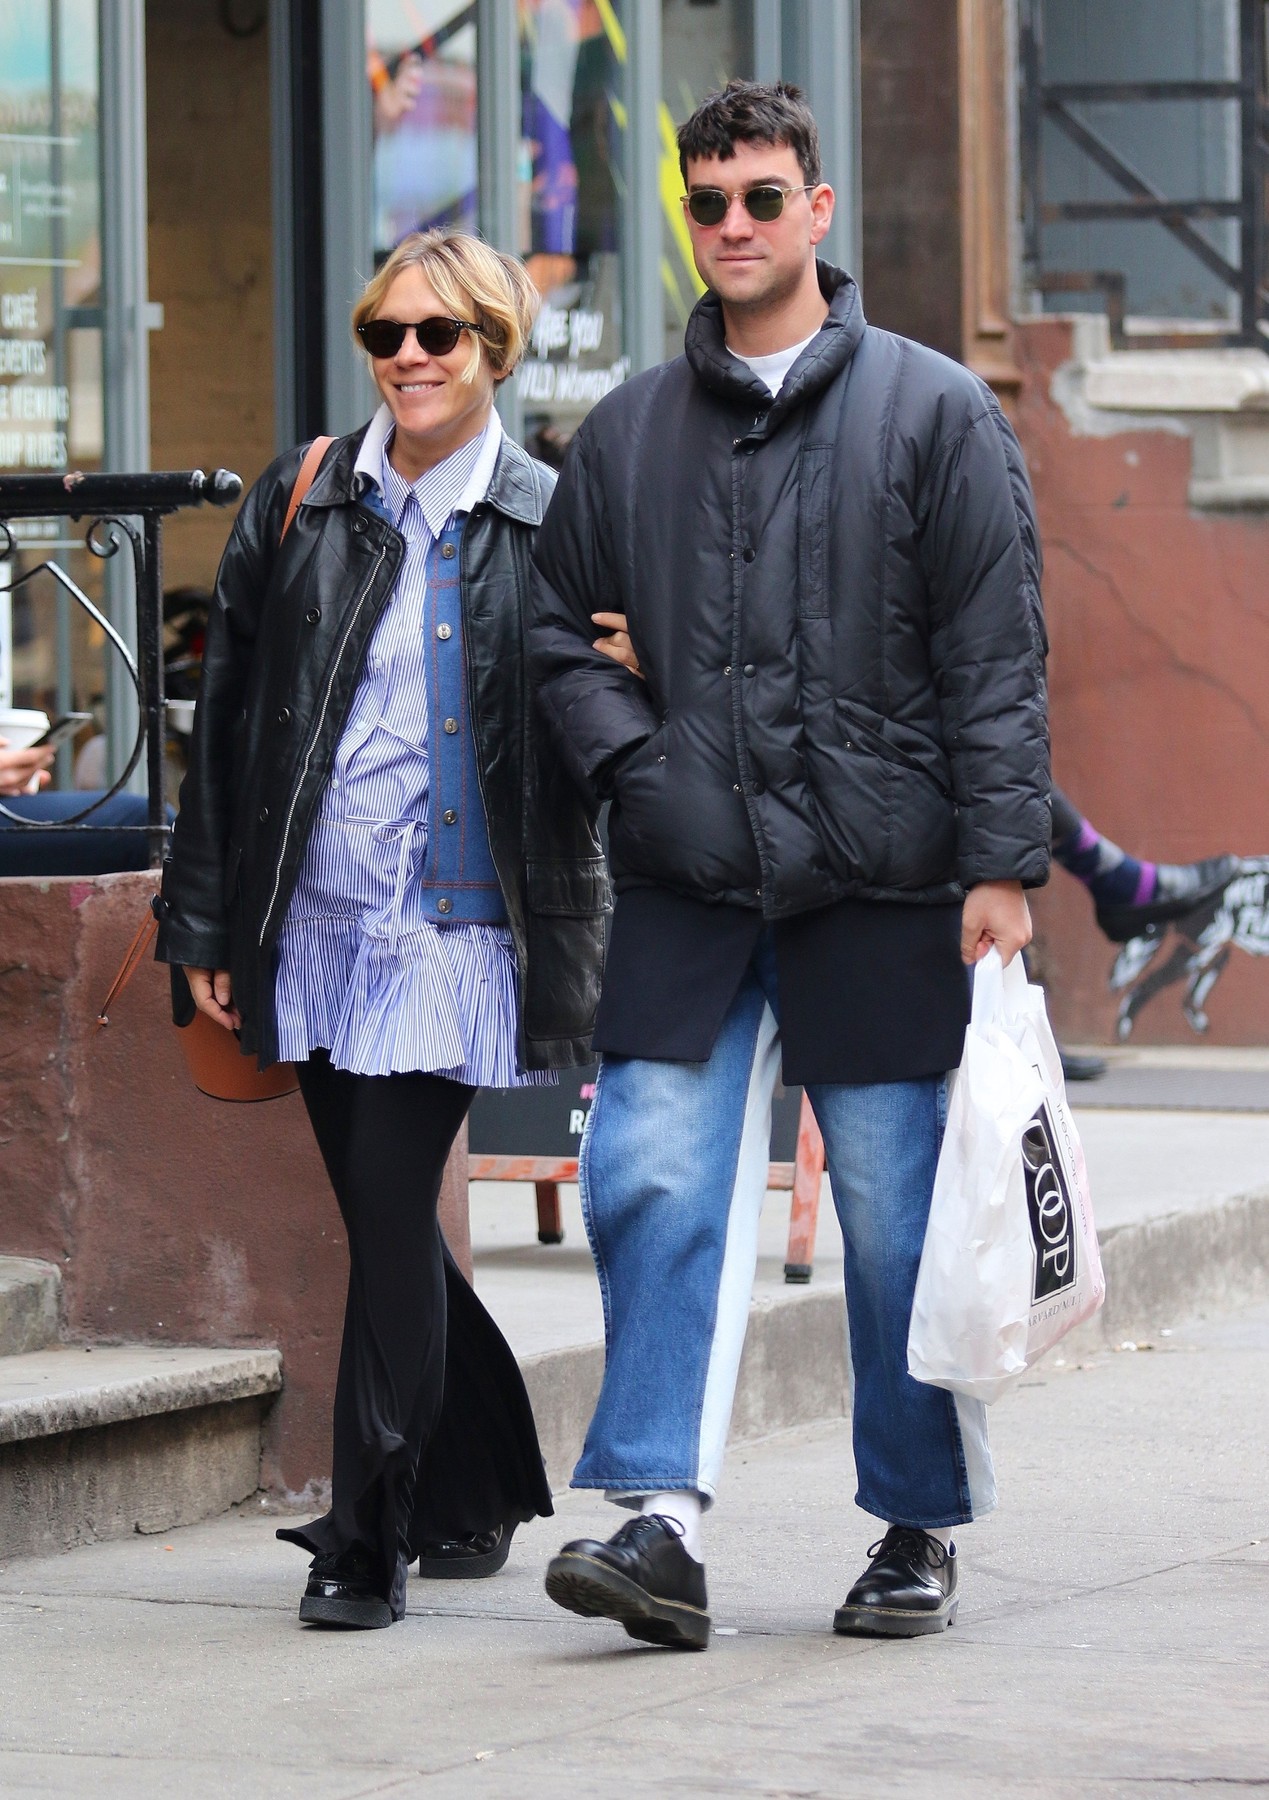 New York City, NY  - Chloe Sevigny and boyfriend Sinisa Mackovic are all smiles while shopping for baby clothes in Manhattan's Soho area.  The pregnant star looked to be in a great mood as she was smiling while shopping at 